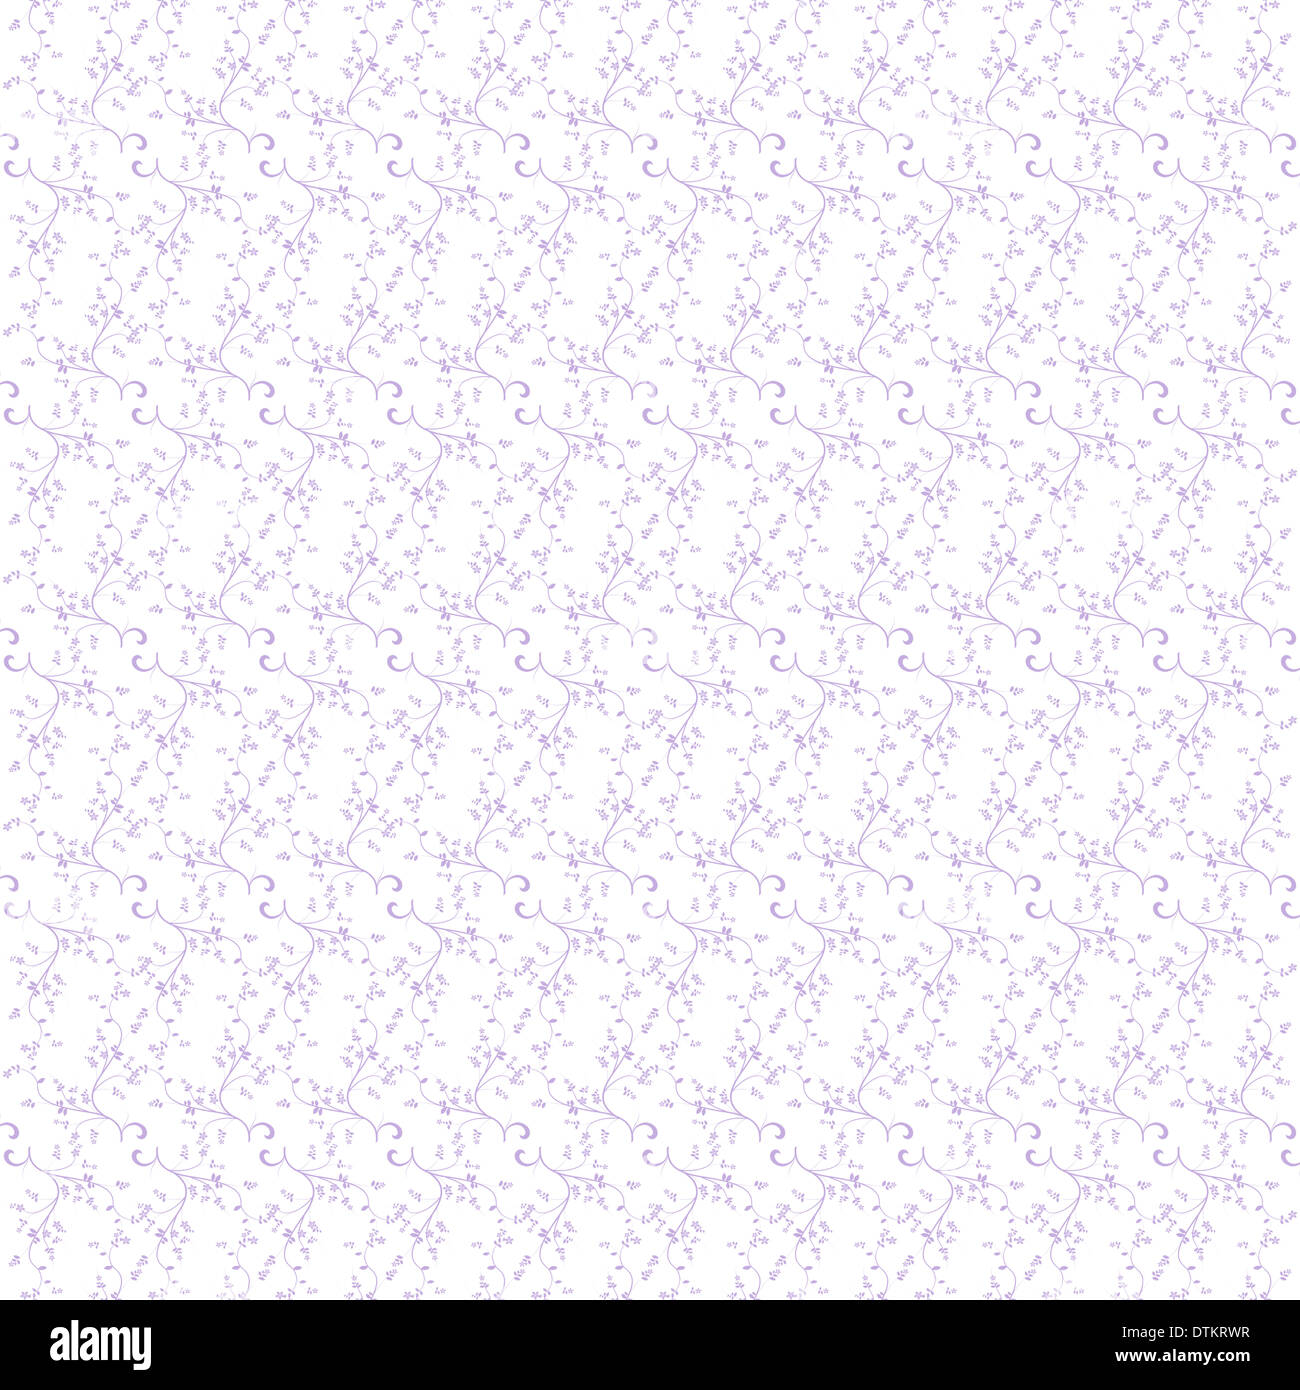 Seamless Floral Pattern Stock Photo